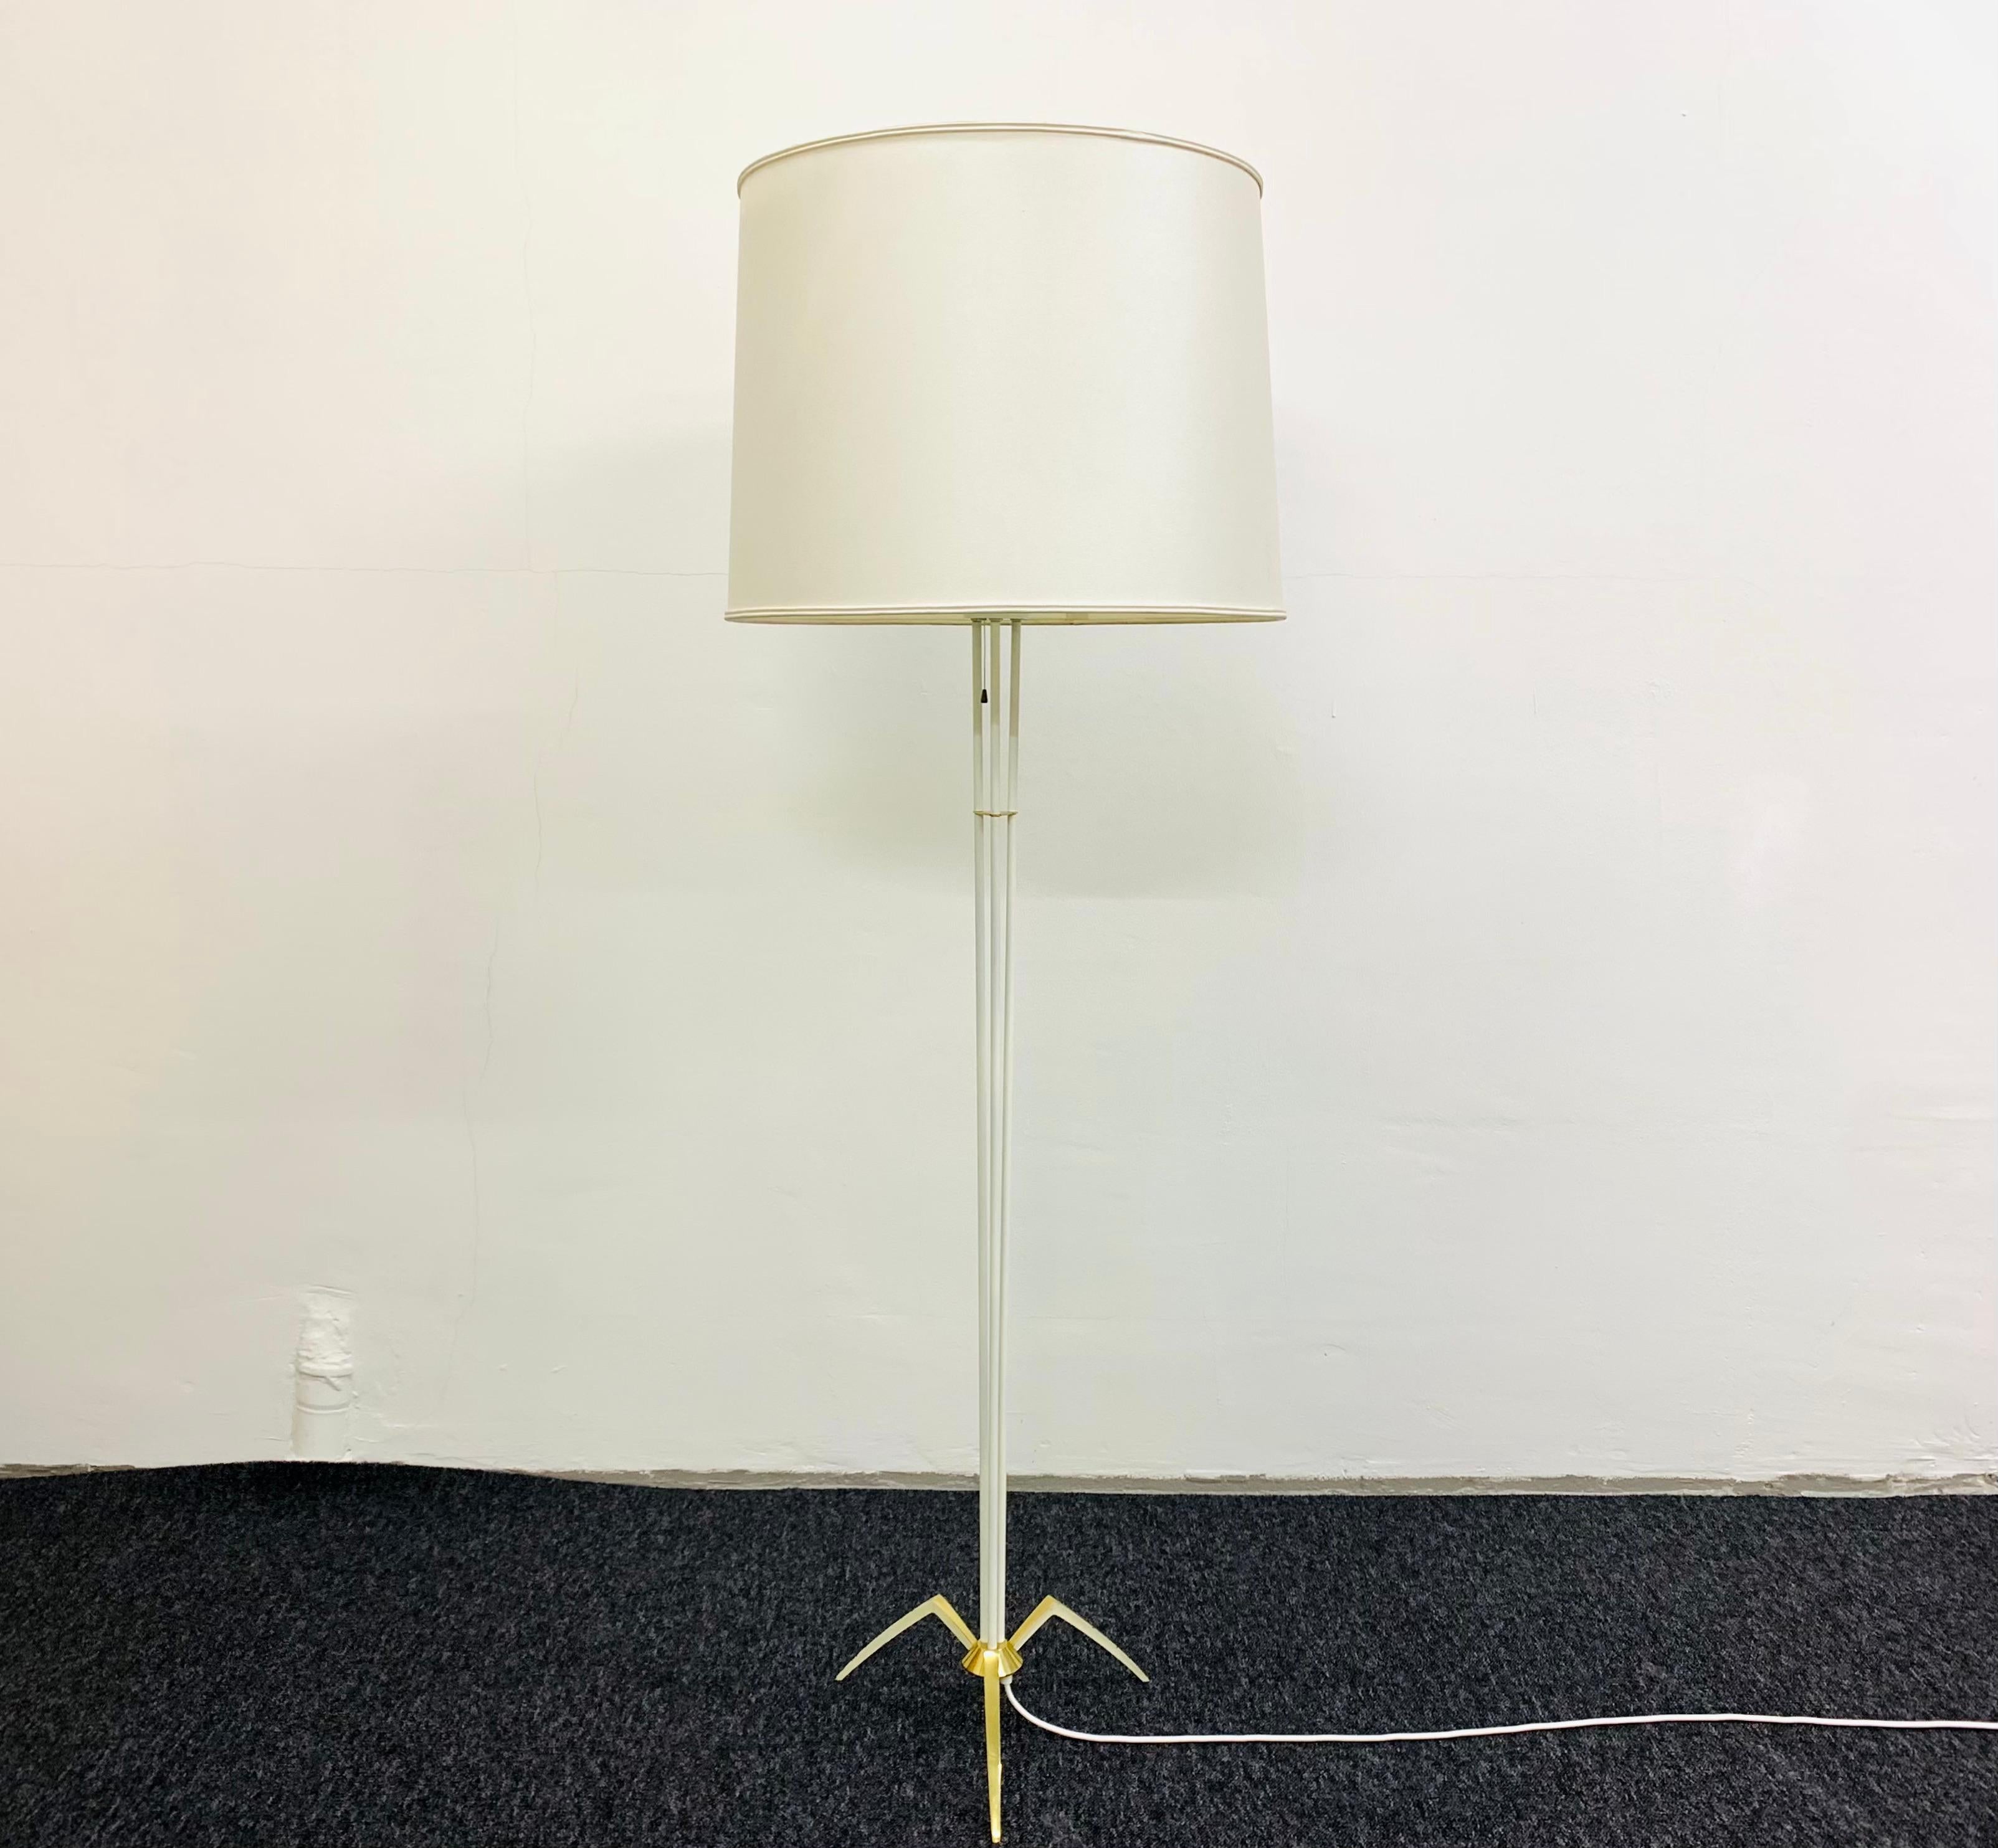 Very nice floor lamp from the 1950s.
Great design and high-quality workmanship.
The loving details and the very pleasant lighting effect make the lamp special and a real favorite.

Condition:

Very good vintage condition with slight signs of